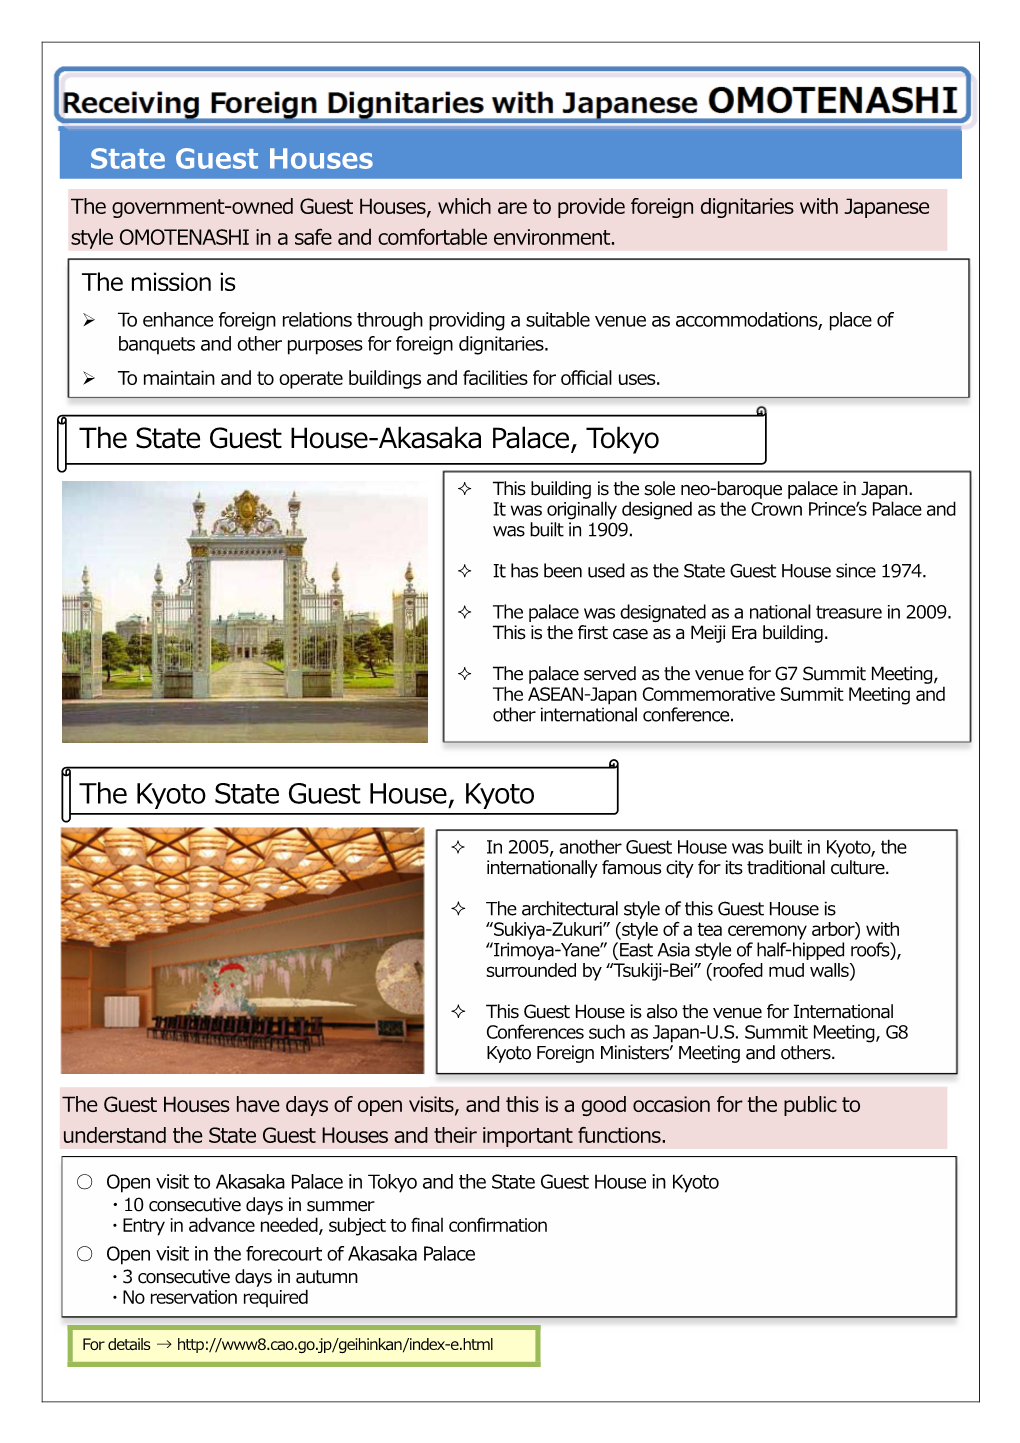 State Guest Houses, Cabinet Office, Government of Japan